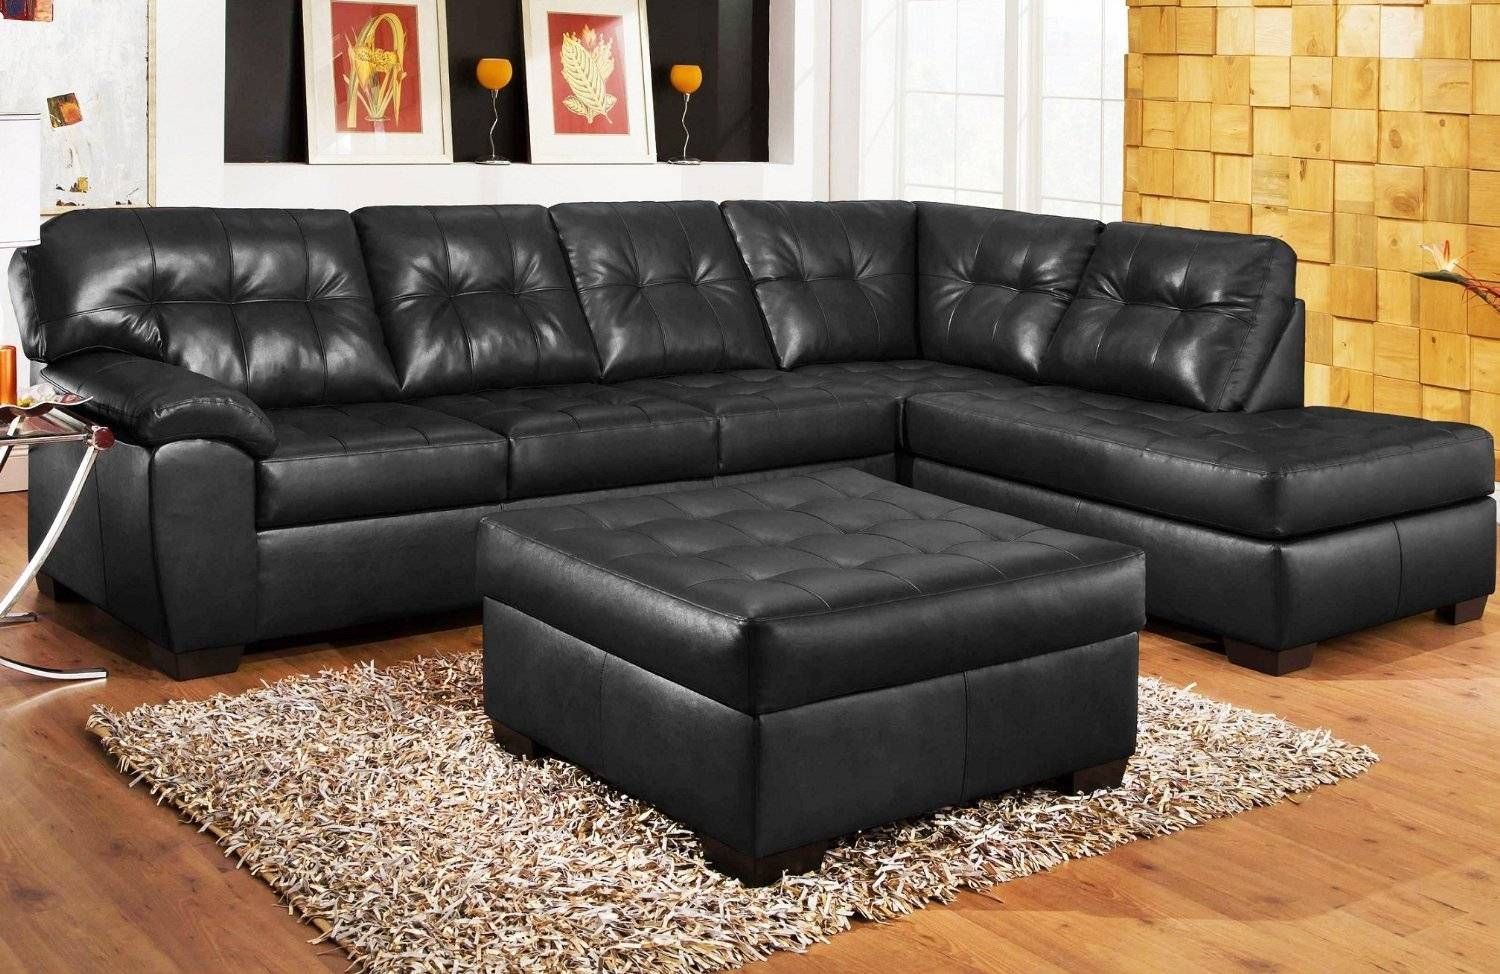 black leather sectional laf haul old sofa